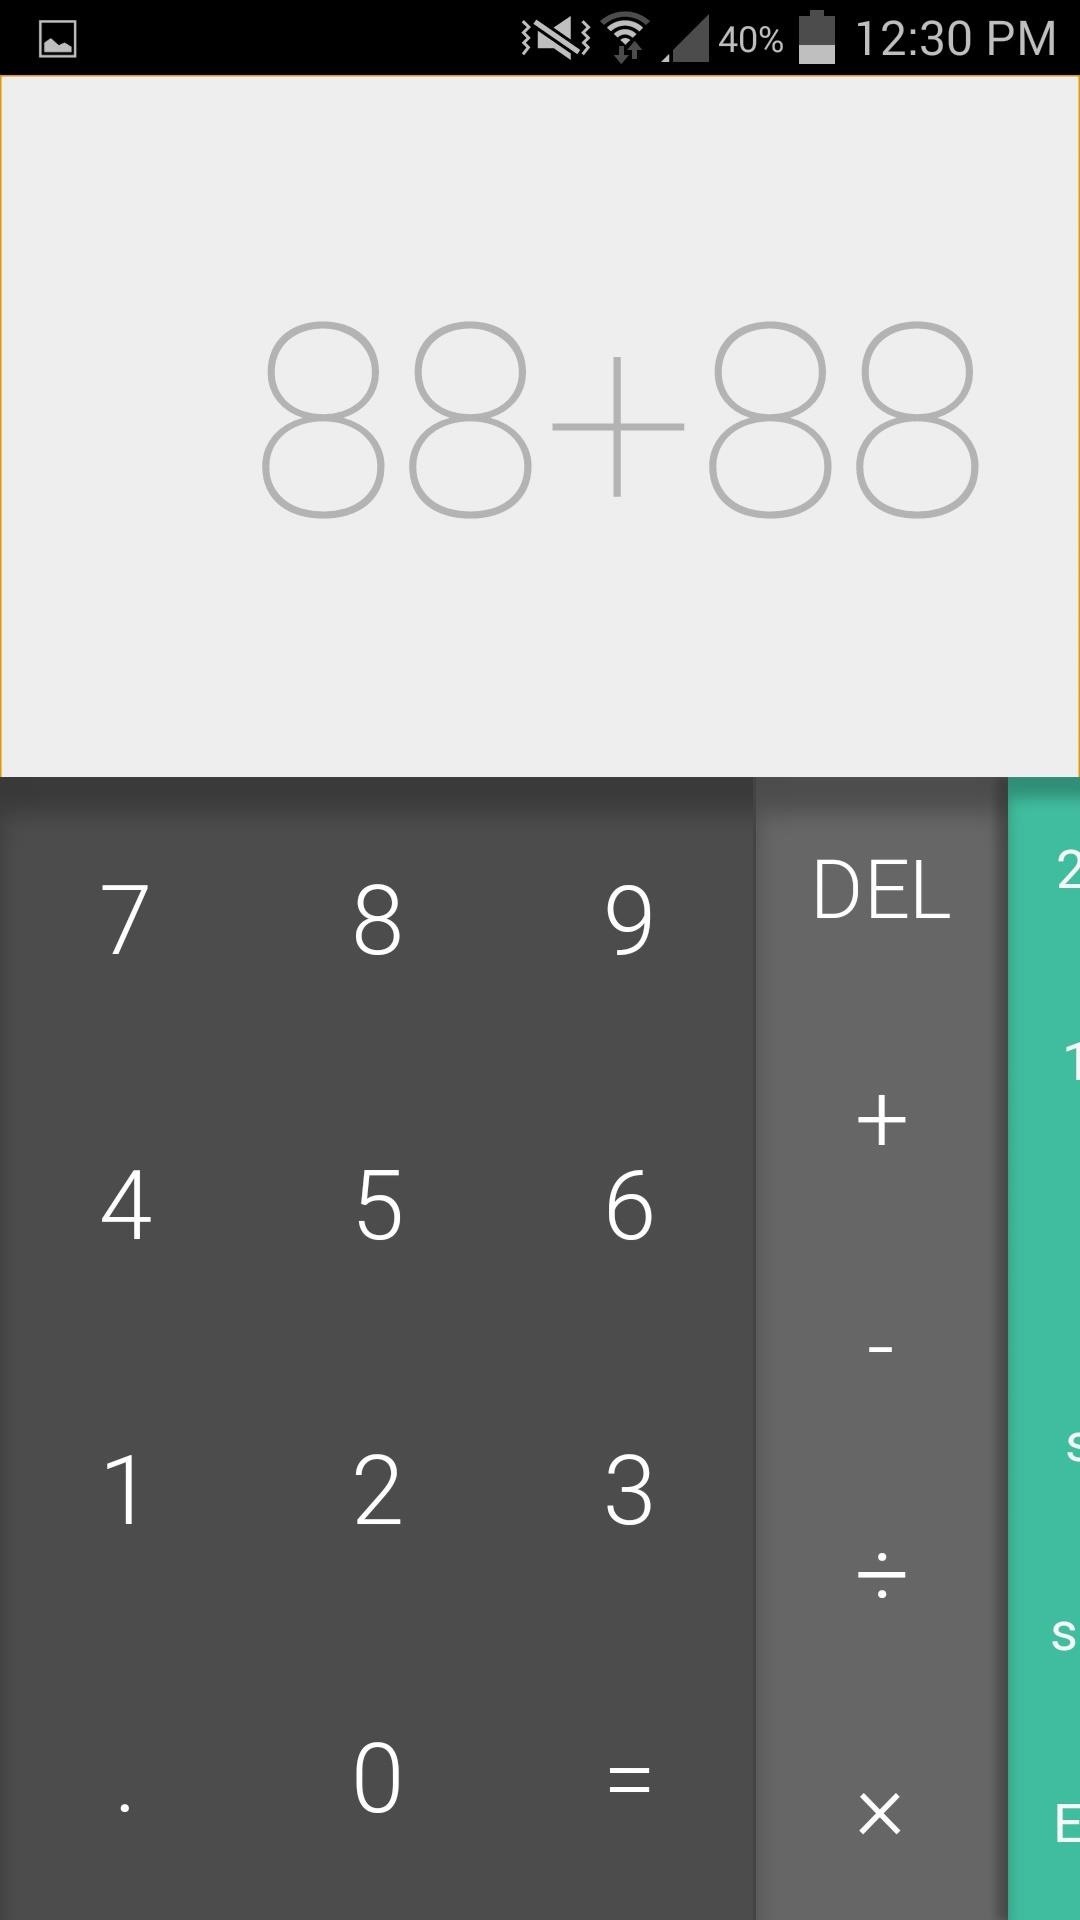 Give Your Android Phone Some “Material Design” with Google's New Calculator App